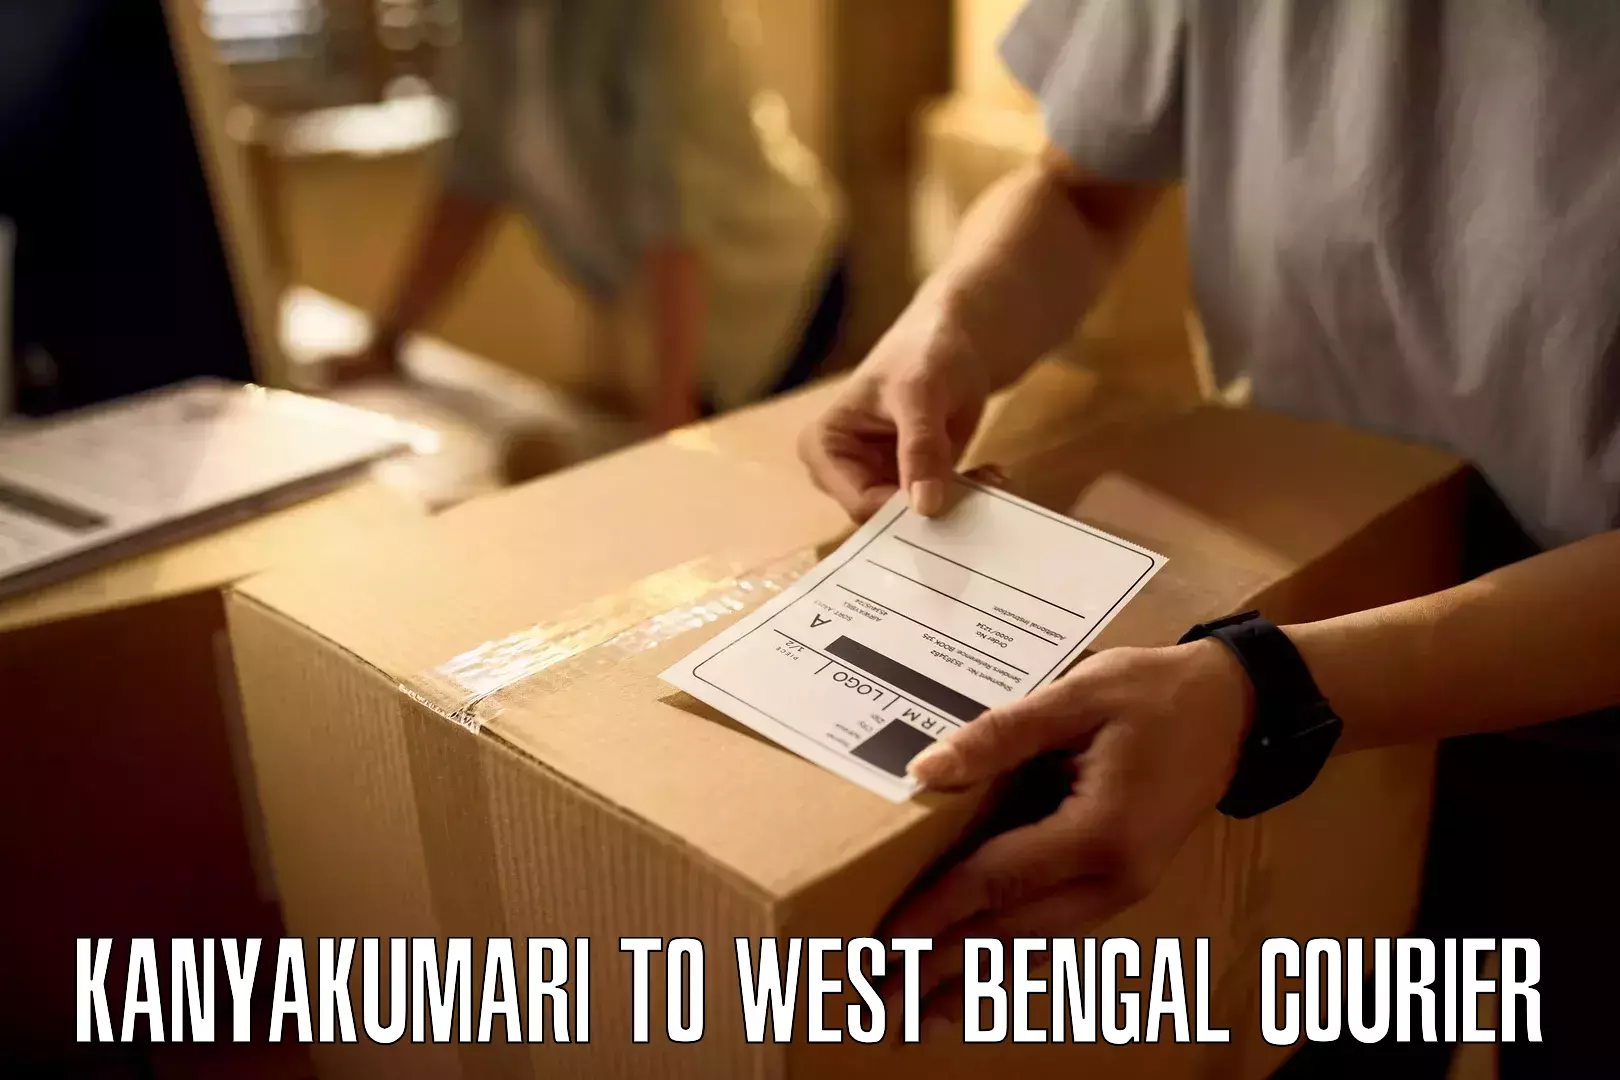 Reliable delivery network Kanyakumari to West Bengal